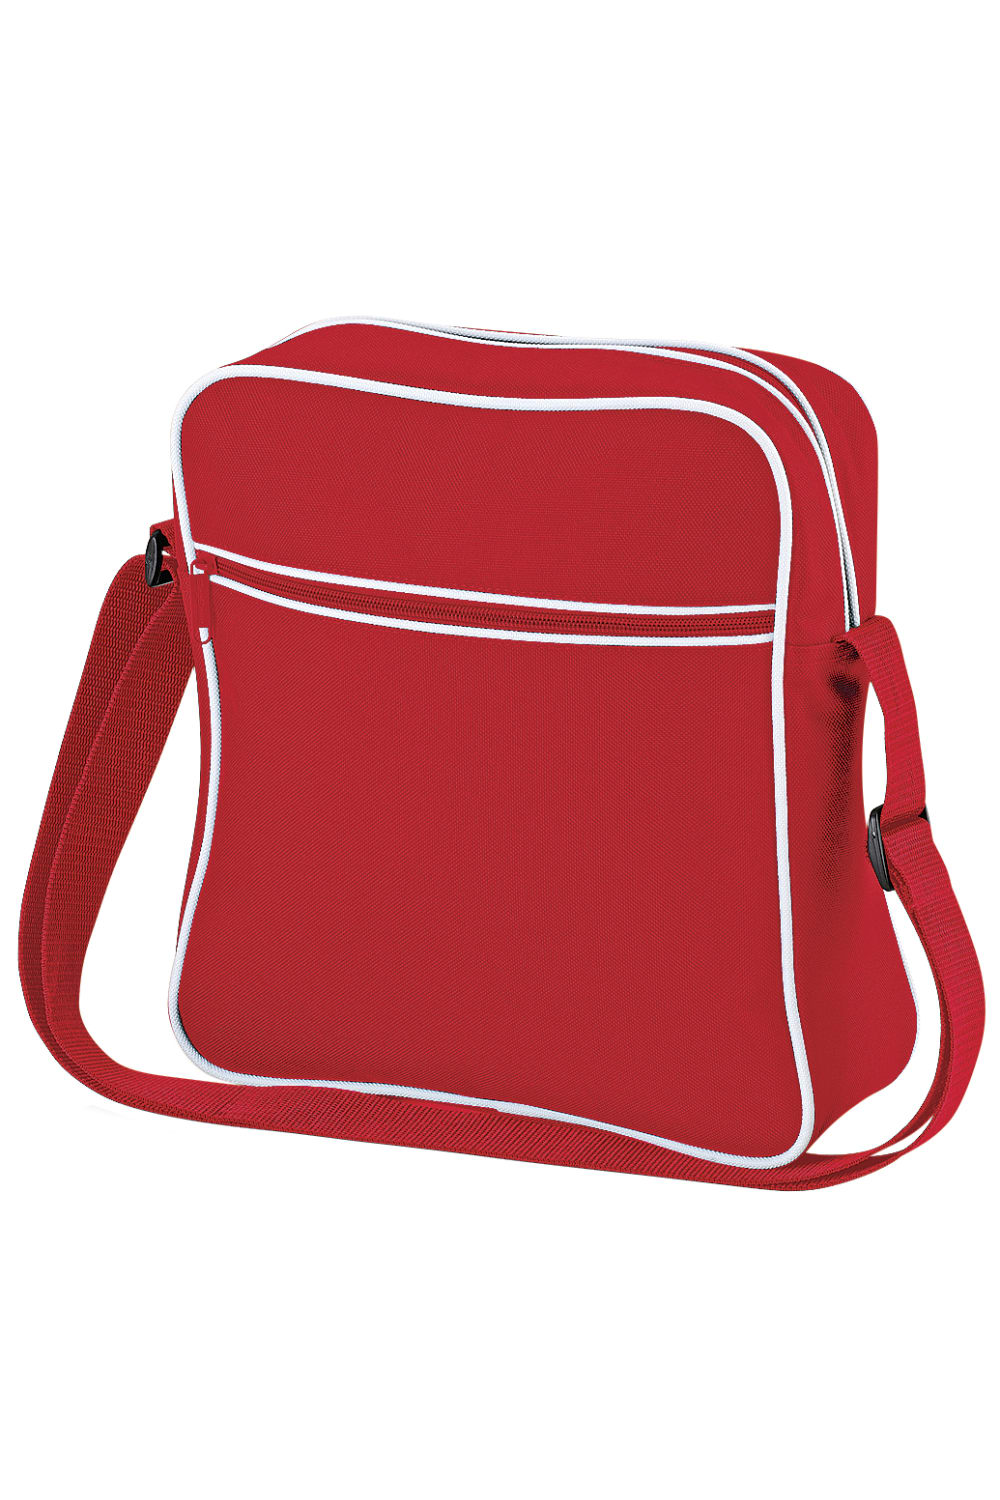 Retro Flight / Travel Bag (1.8 Gallons) (Pack of 2) - Classic Red/White